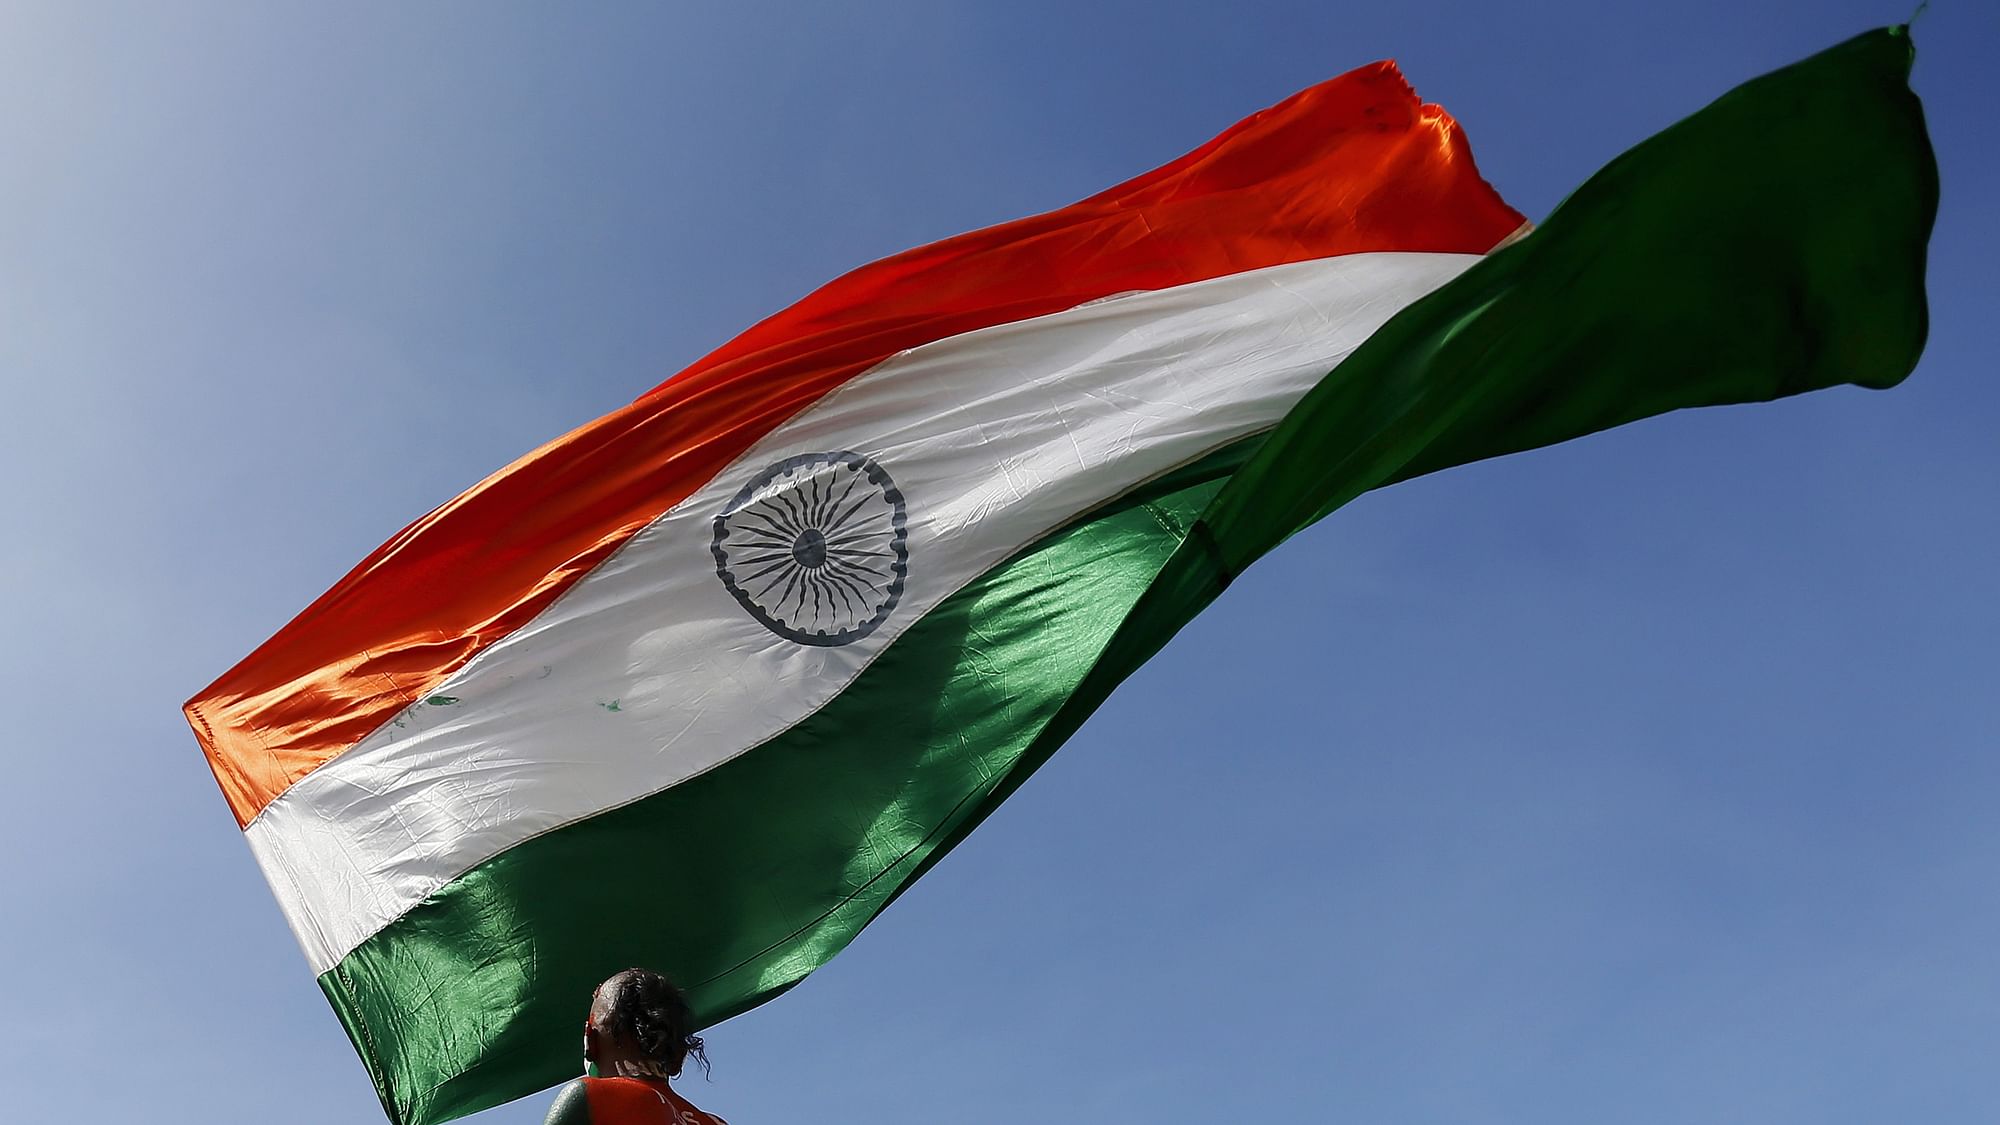 India’s national flag. Image used for representational purposes.